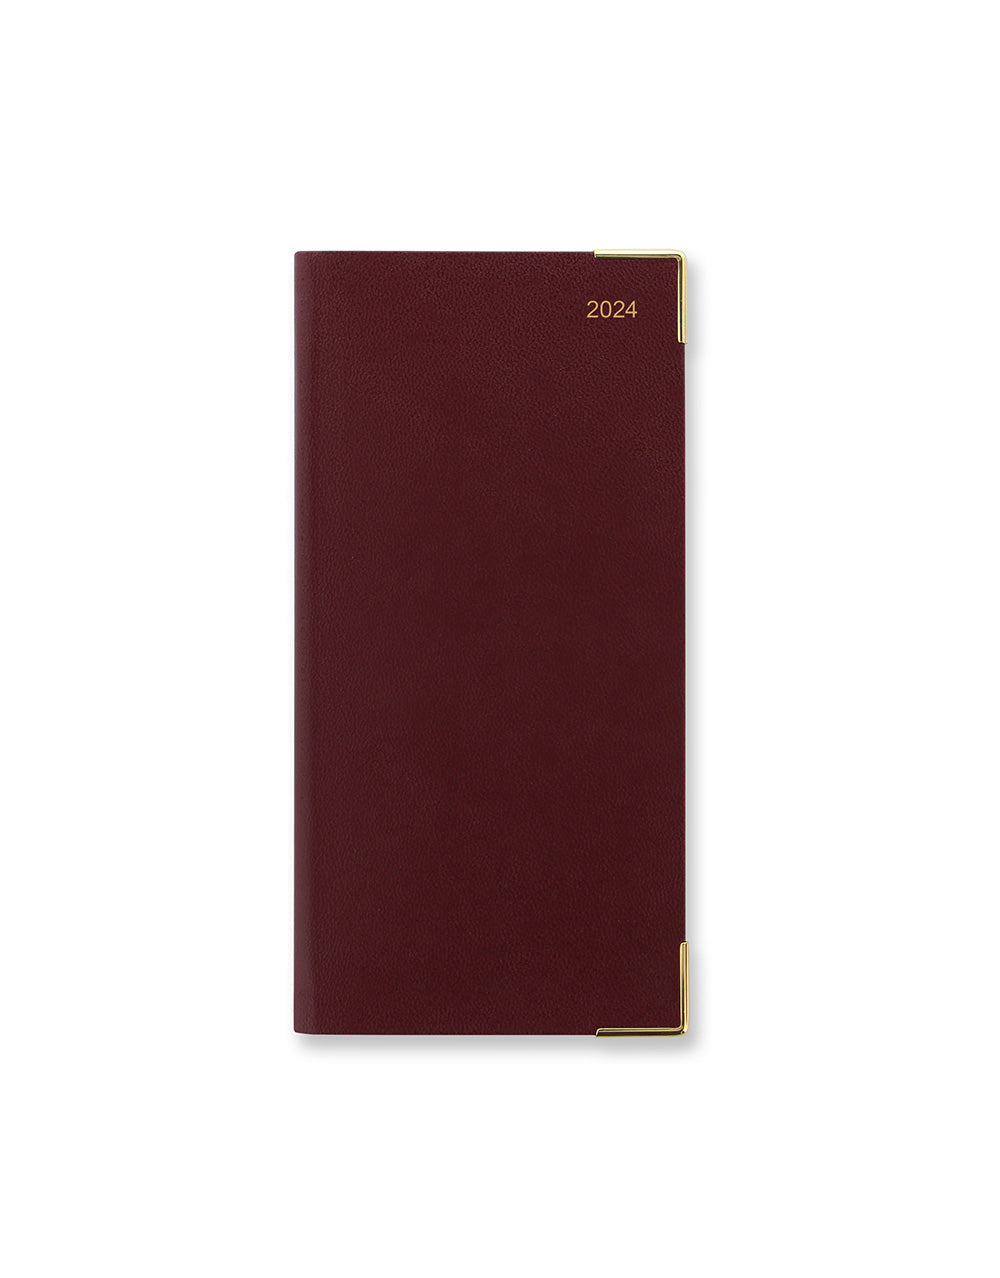 Letts of London 2024 Classic Slim Week to View Monthly Planner - Burgundy